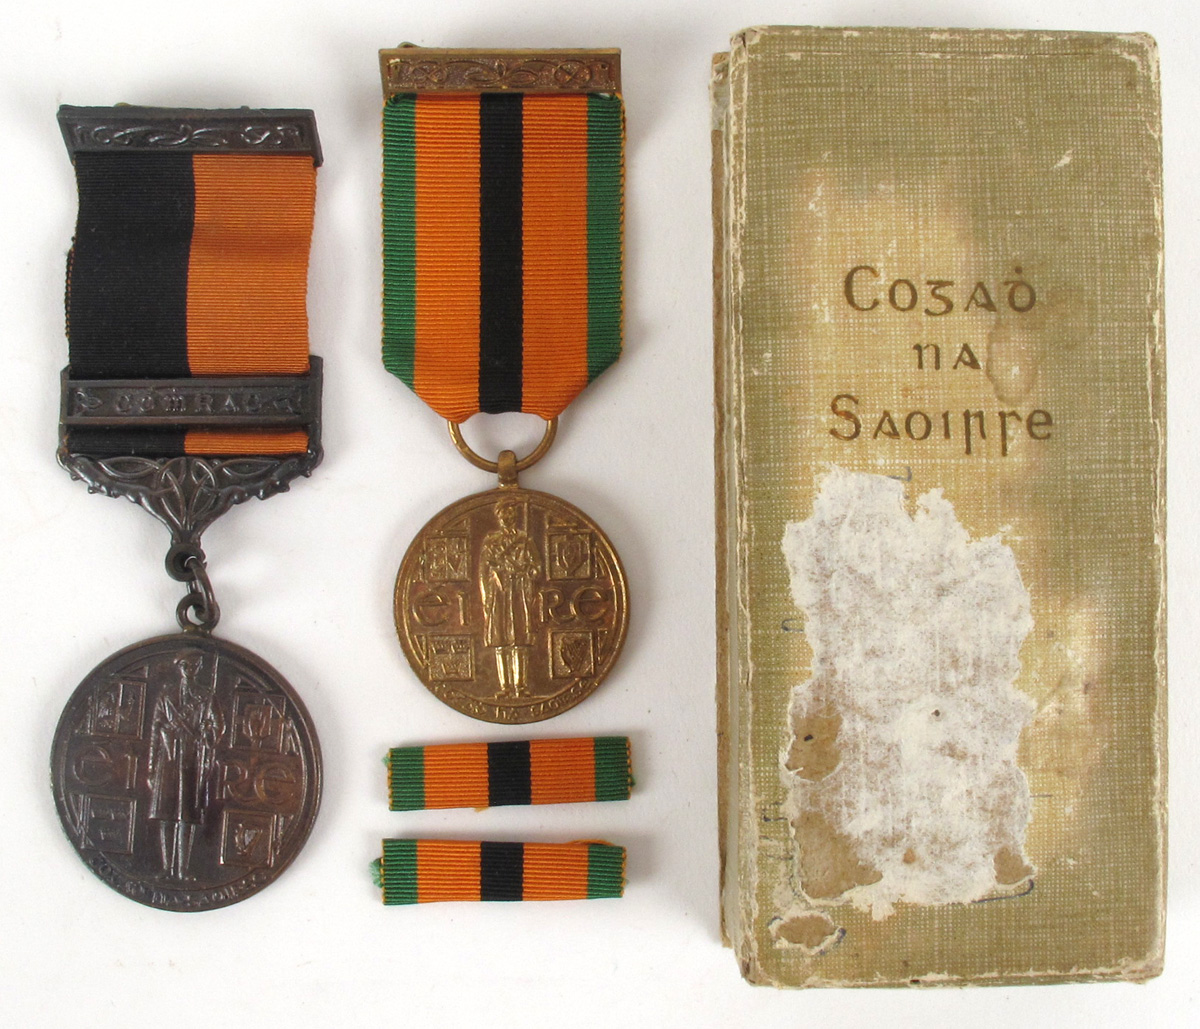 1917-21 War of Independence Service Medal with combatant's bar and 1971 Truce Anniversary Medal. at Whyte's Auctions